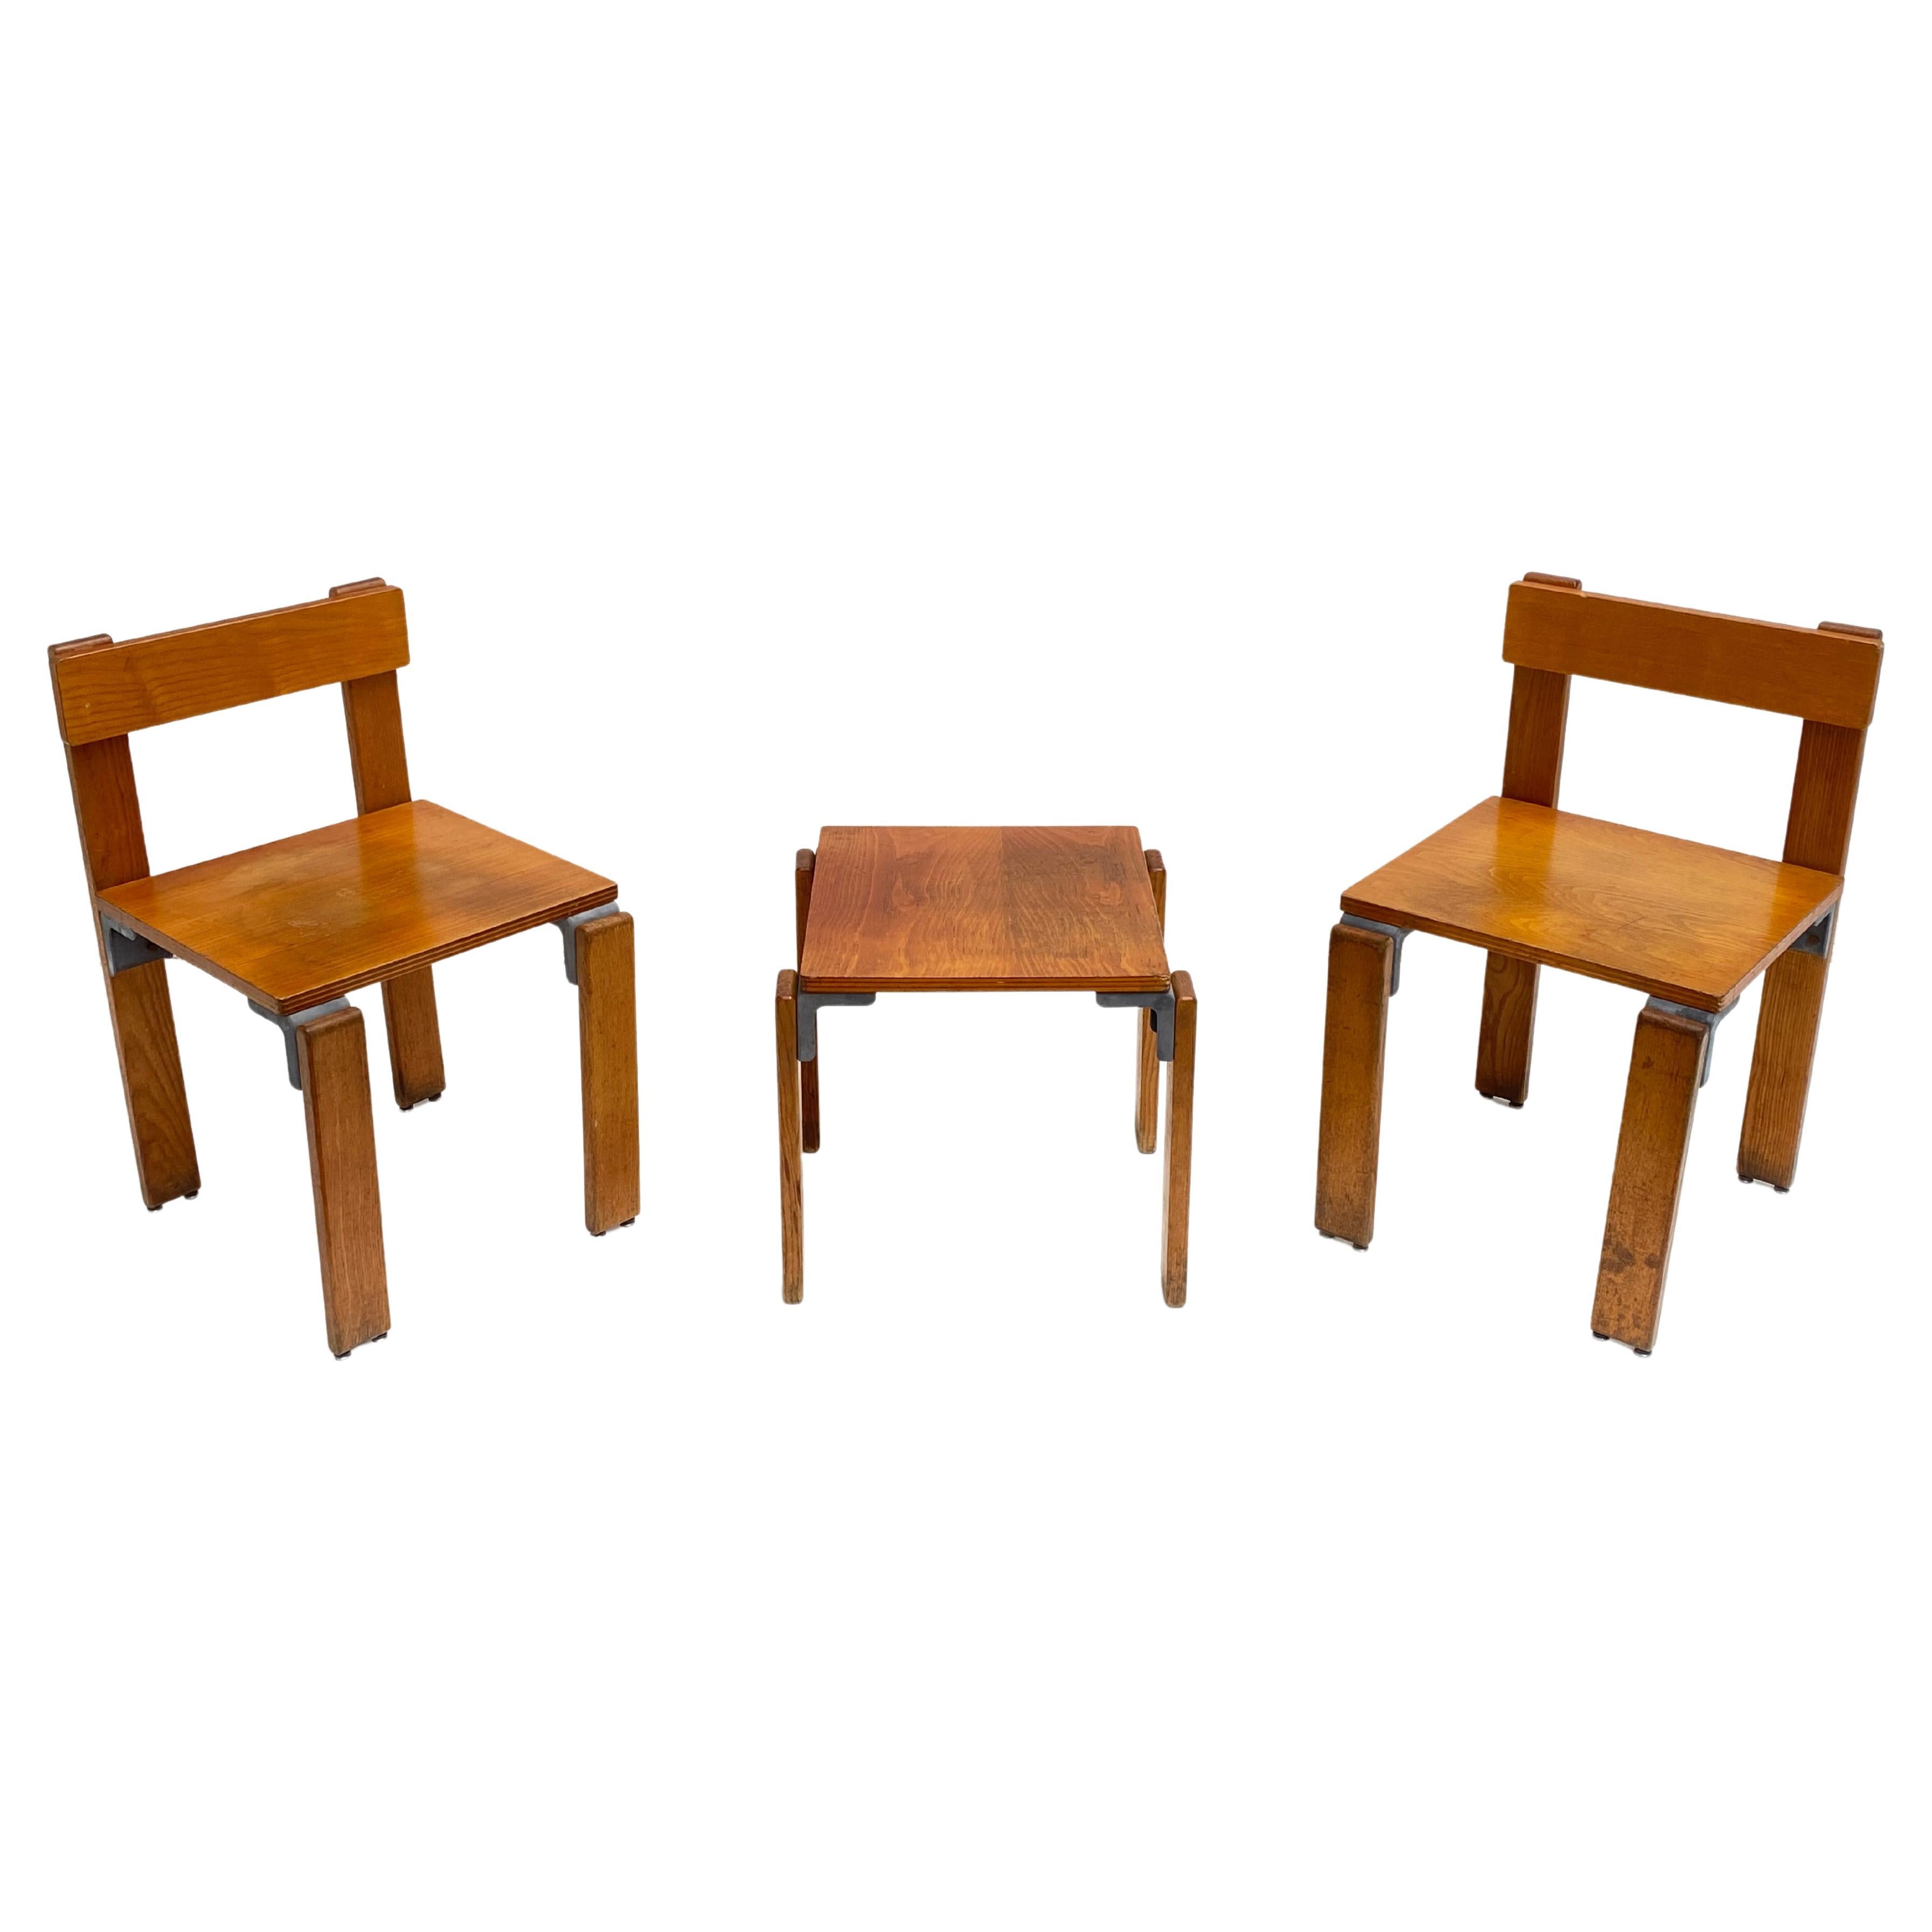 Candilis Chairs and Stool / Table